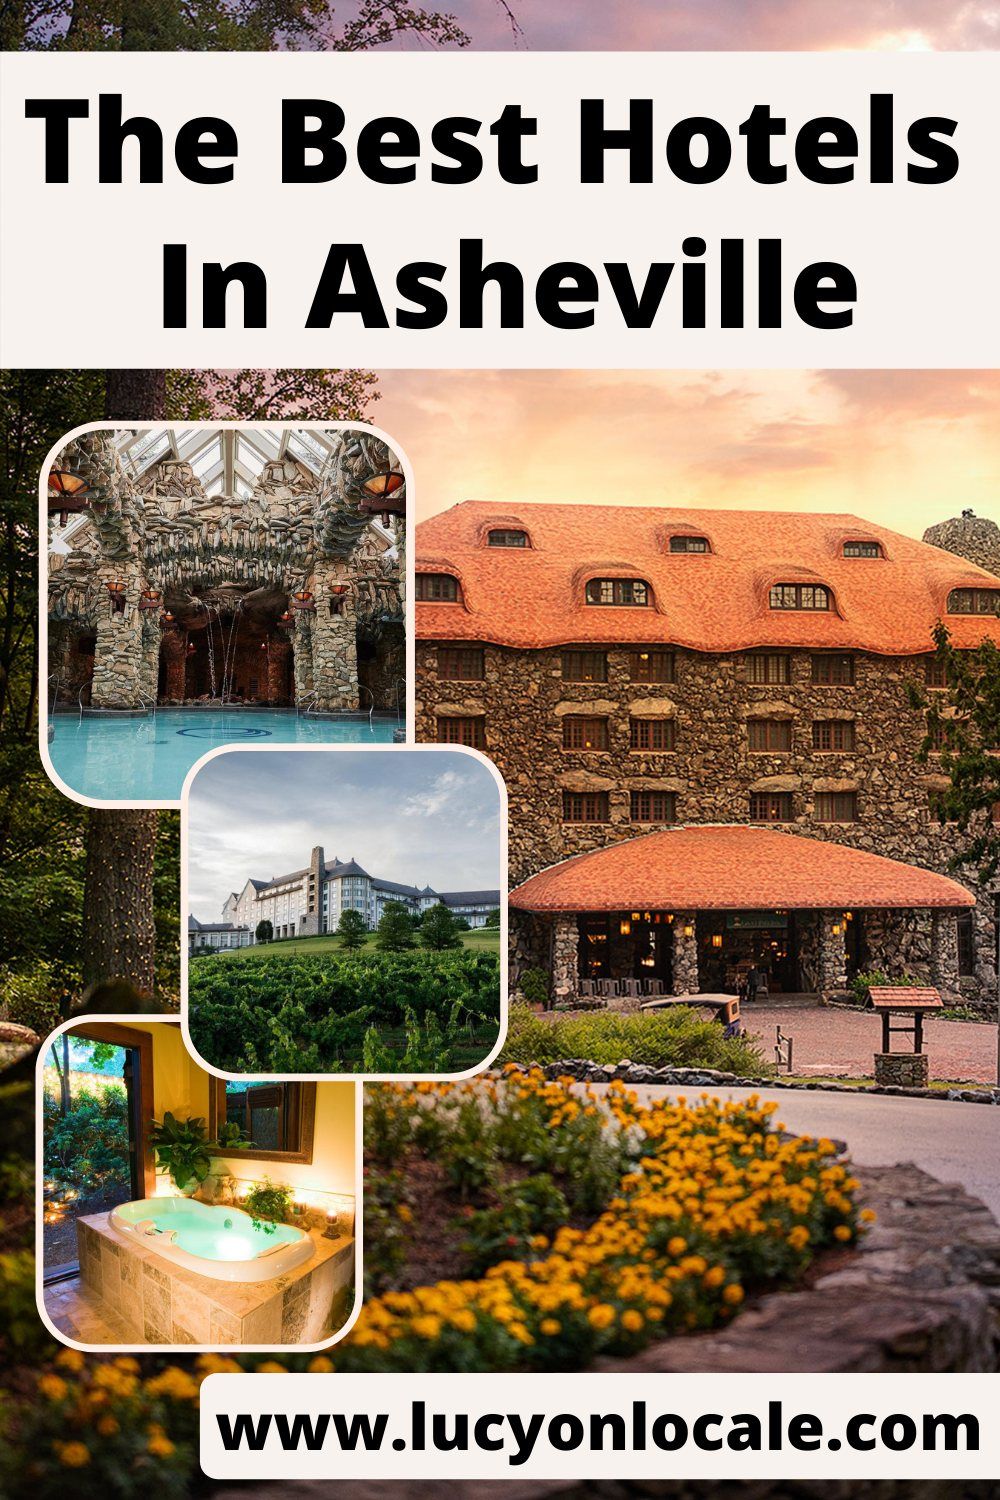 The Best Hotels in Asheville